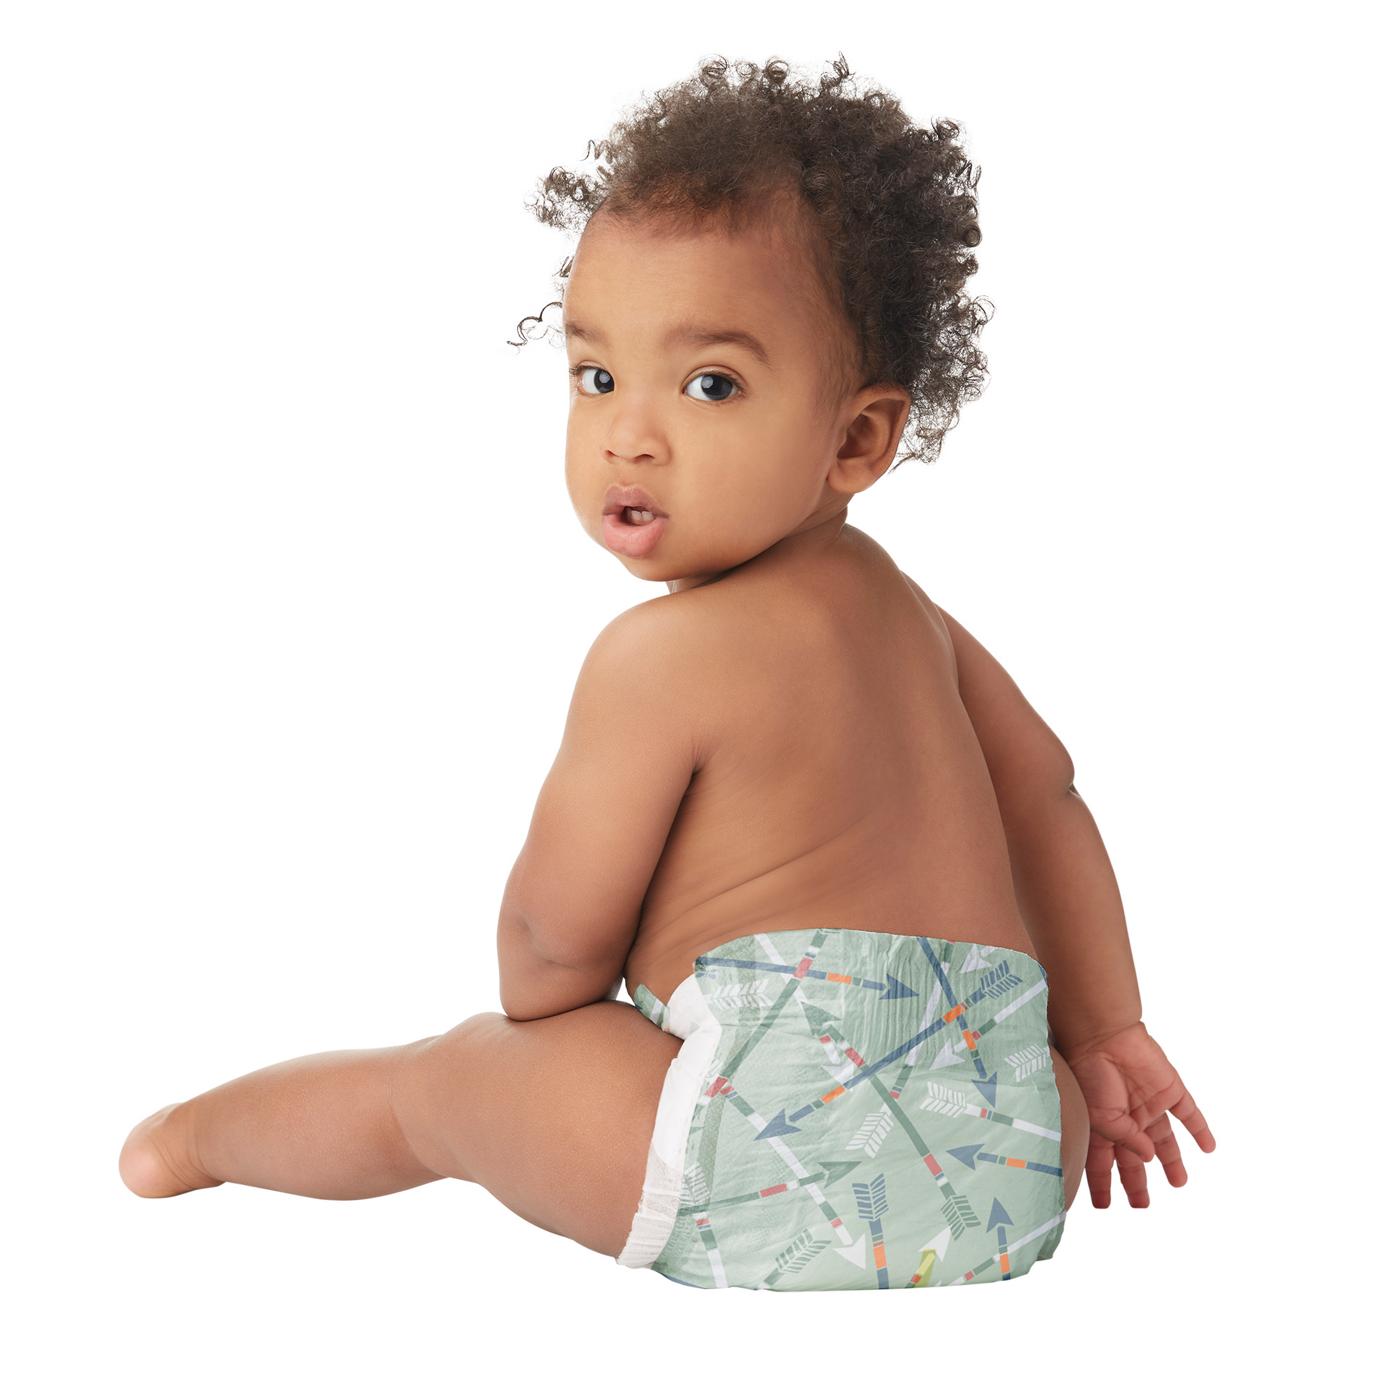 The Honest Company Clean Conscious Diapers - Size 6, This Way that Way Print; image 6 of 6